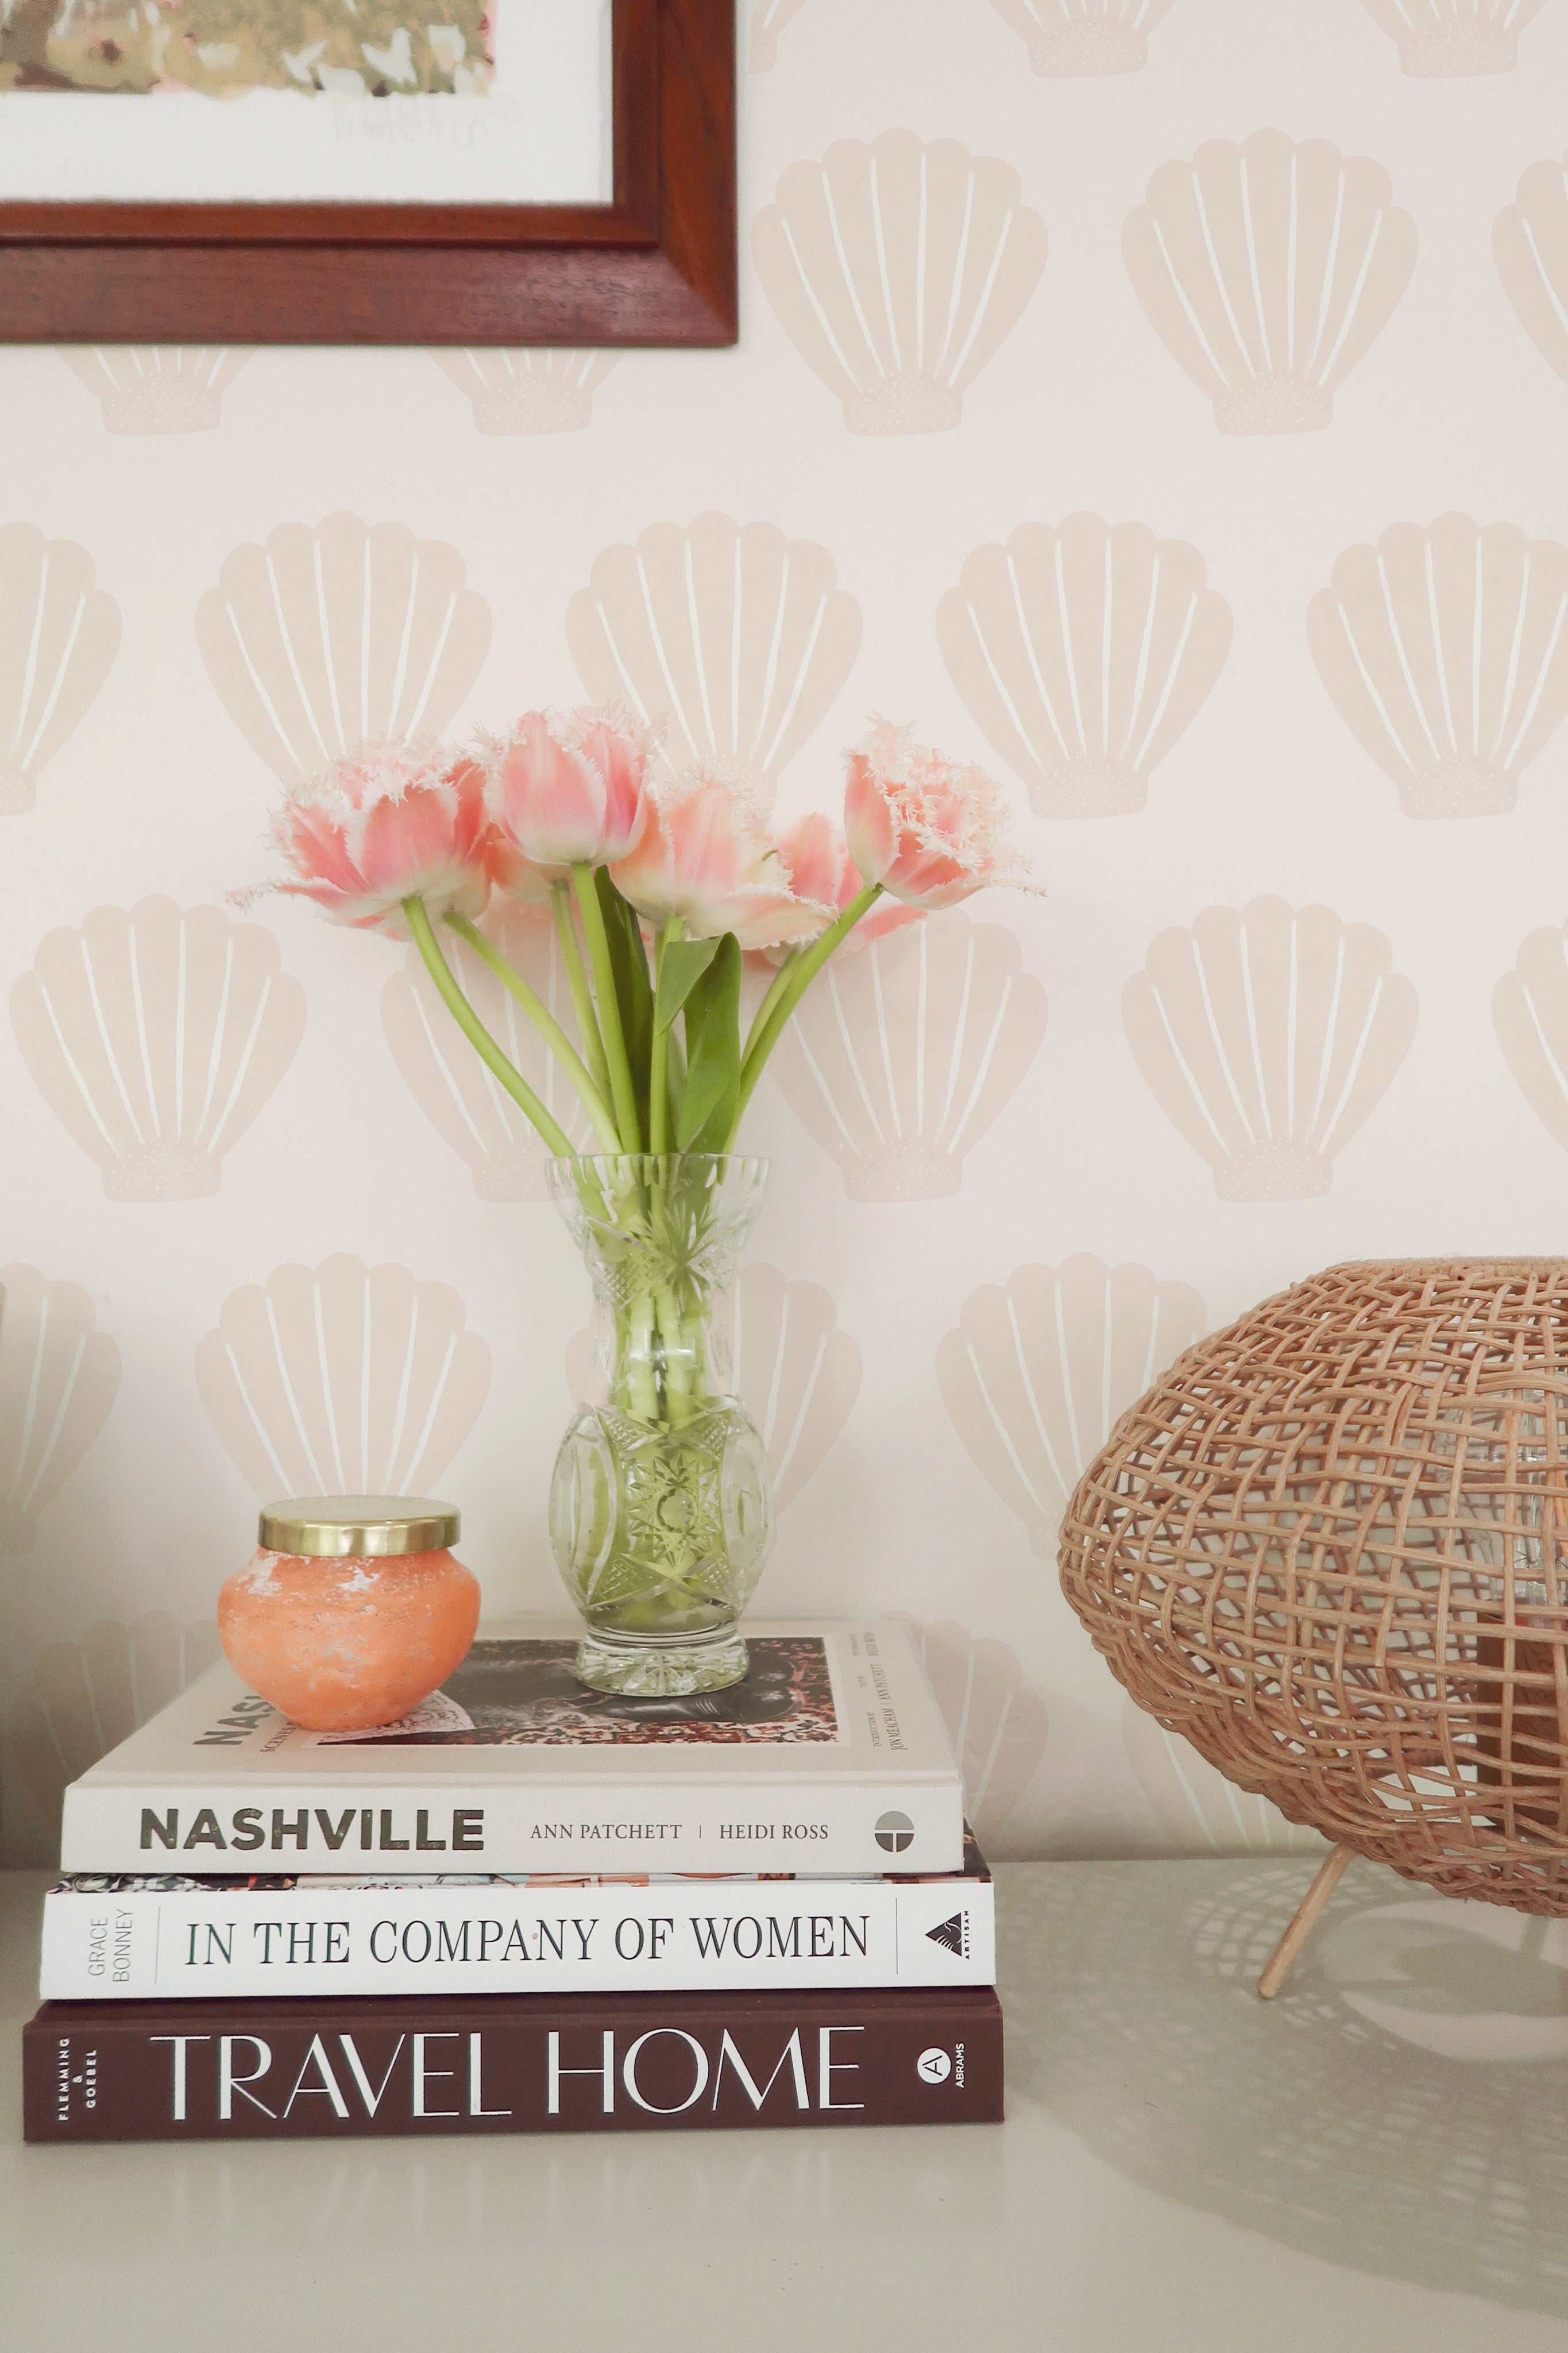 A cozy reading nook with Mermaid Sea Shell wallpaper providing a charming backdrop. The scene includes a wooden chair, a pile of books, and fresh flowers, creating a perfect spot for reading and relaxation.